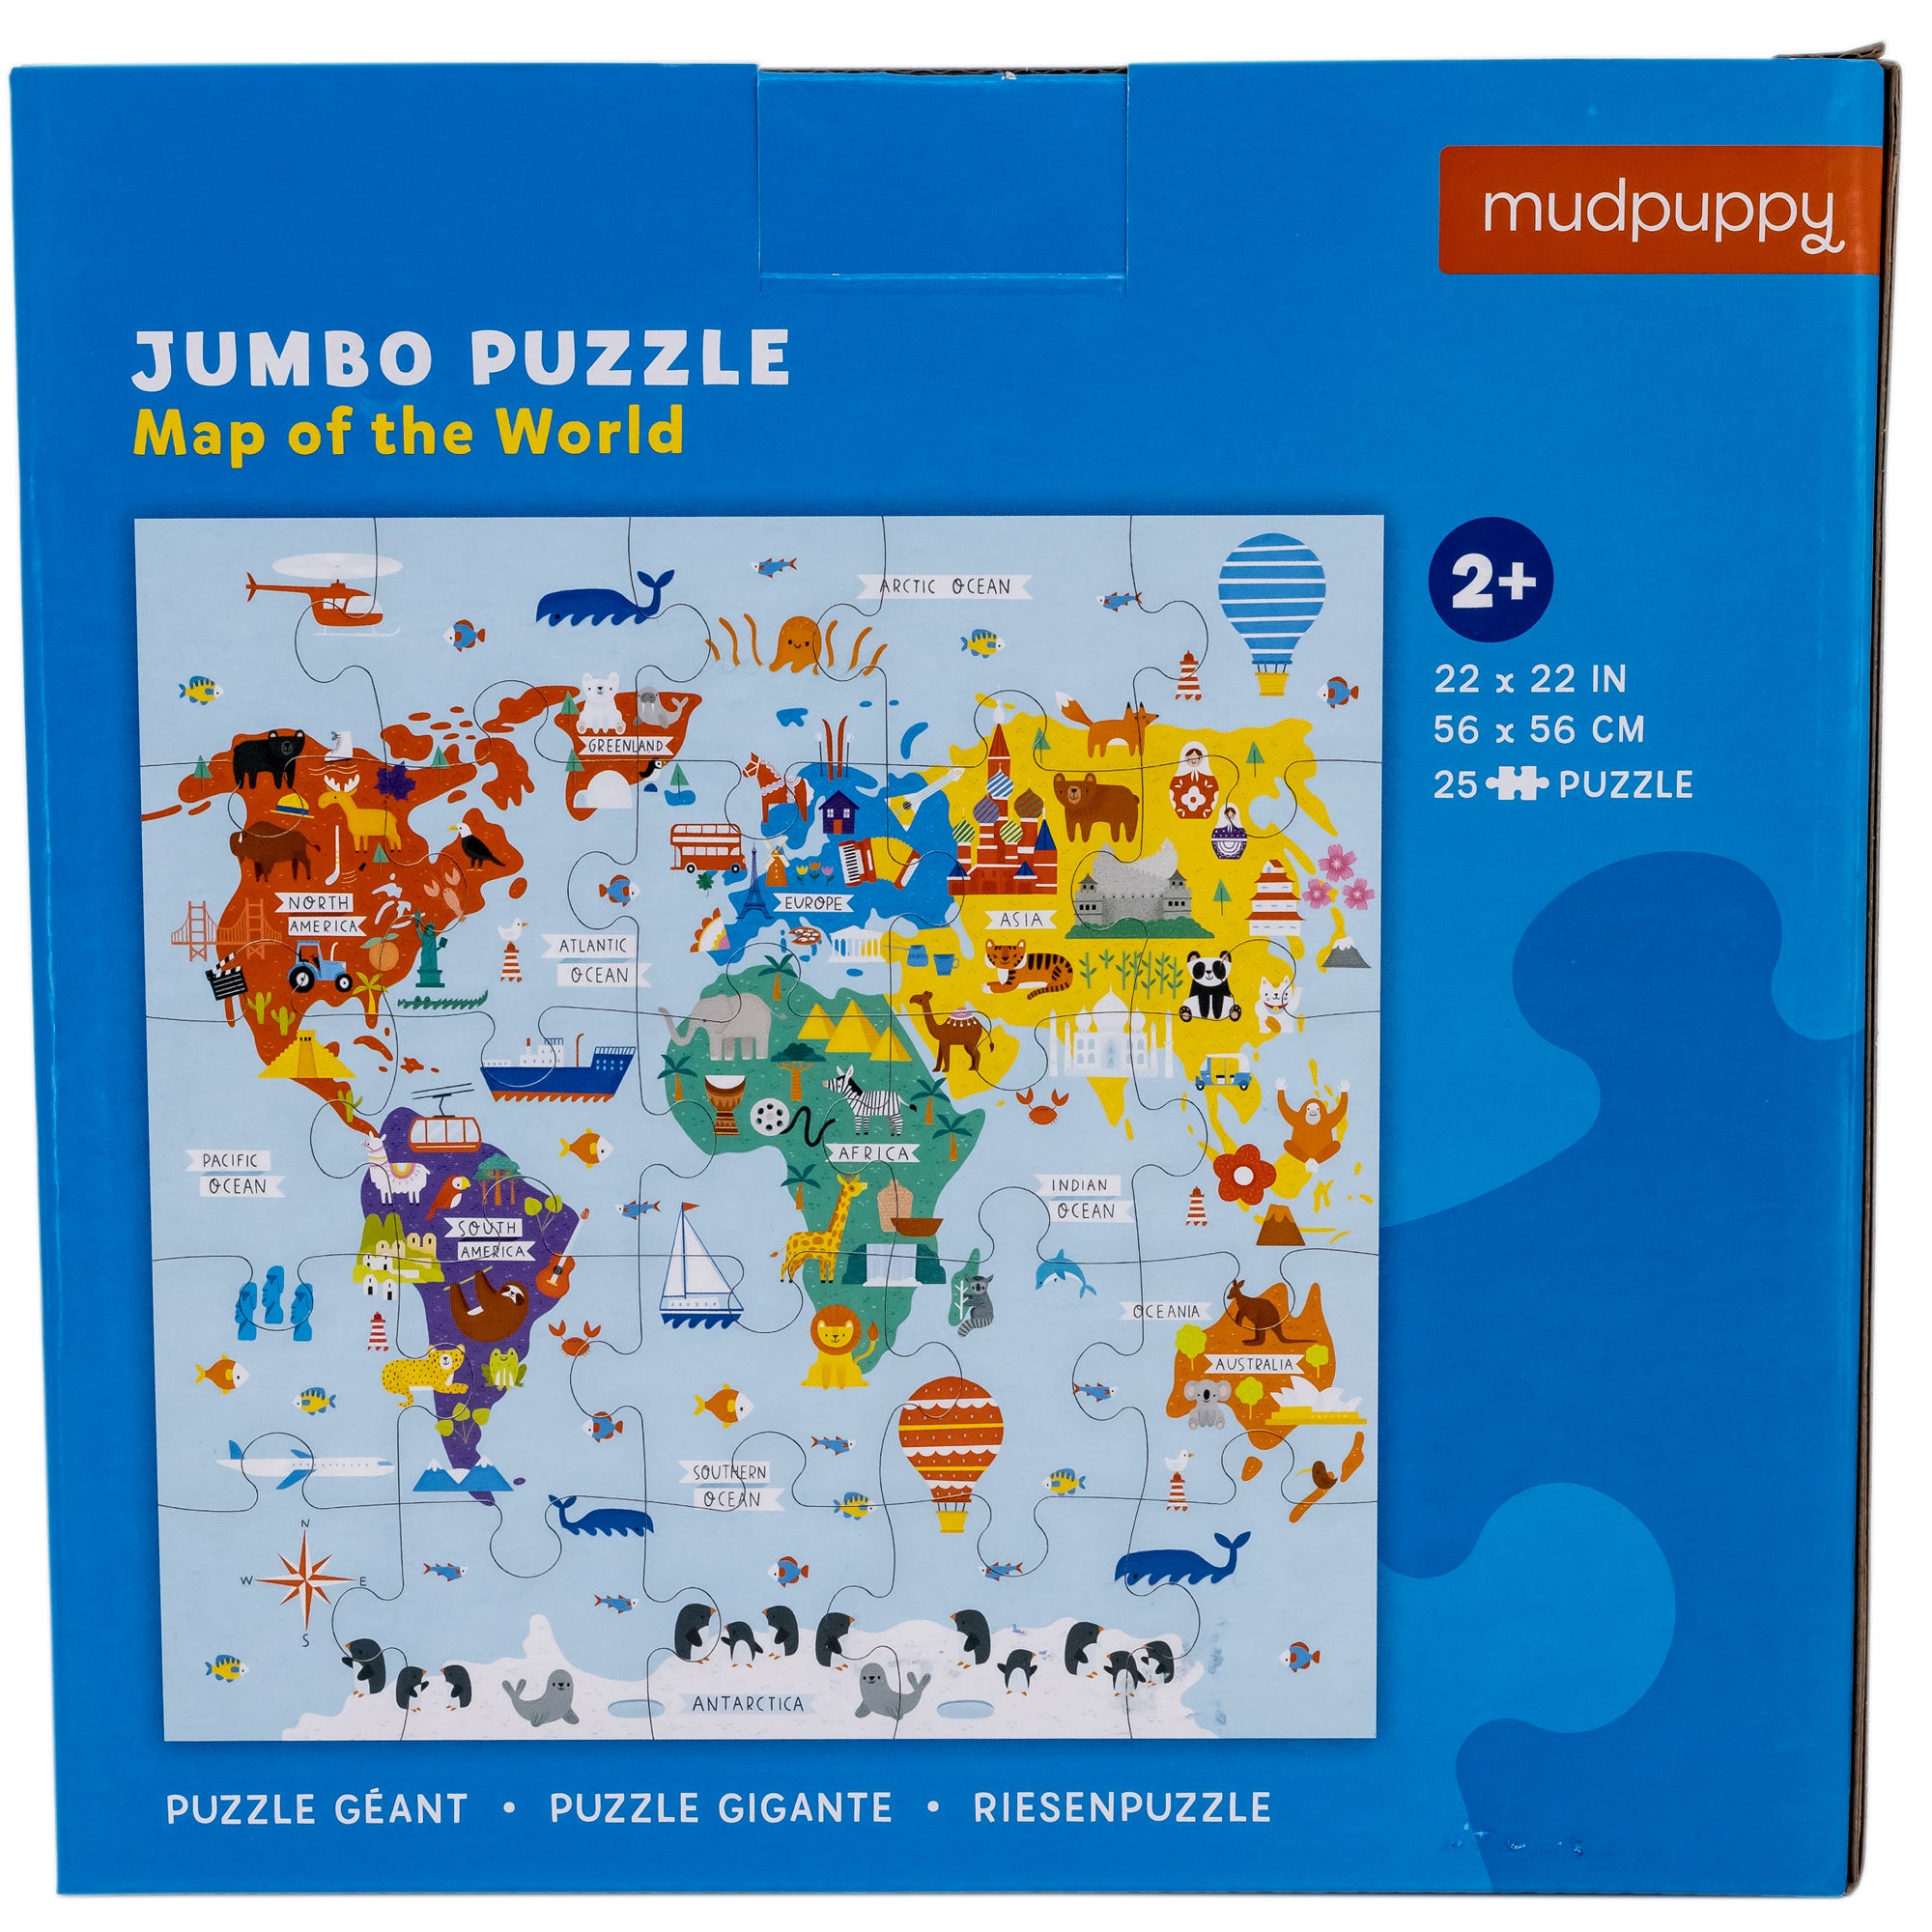 Jumbo Puzzle, Map of the World box back. The background is blue with a darker blue puzzle piece silhouette in the lower-right. There is a completed map image over the box. The puzzle is mainly light blue with each continent a different color and many animals and vehicles placed all over the top. North America is red, South America is purple, Africa is green, Europe is blue, Asia is yellow, and Australia is orange. Antarctica is white with penguins and seals. The 25-piece puzzle is 22 by 22 inches.